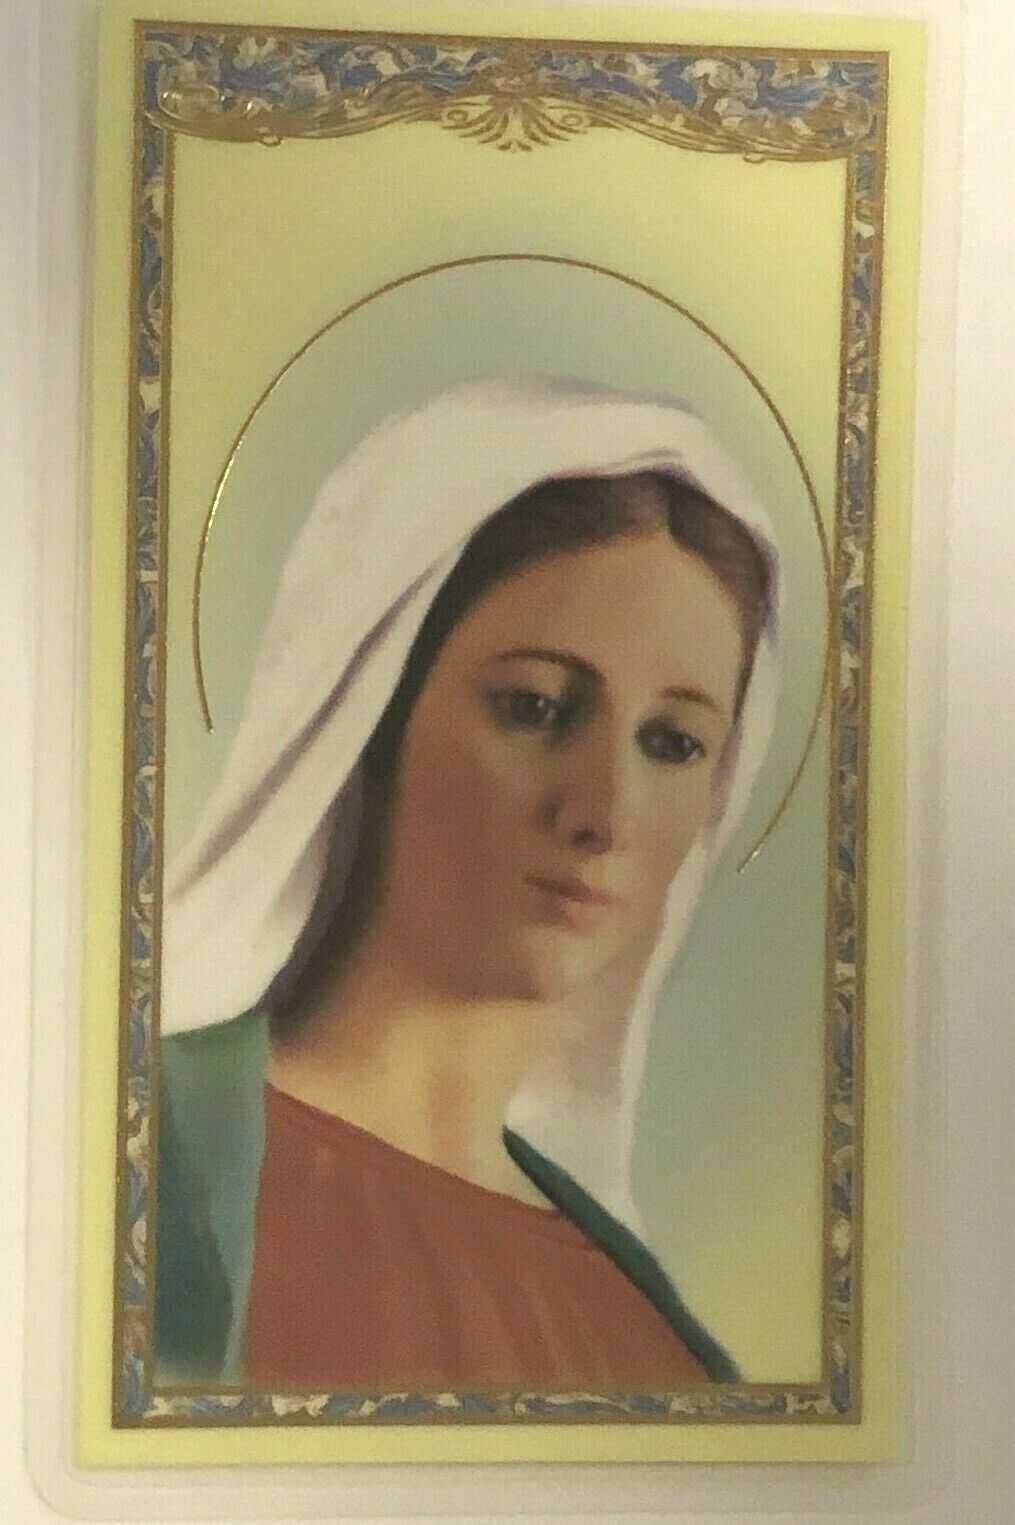 Prayer to the Mother of Goodness, Love & Mercy /Our Lady of Medjugorje, New